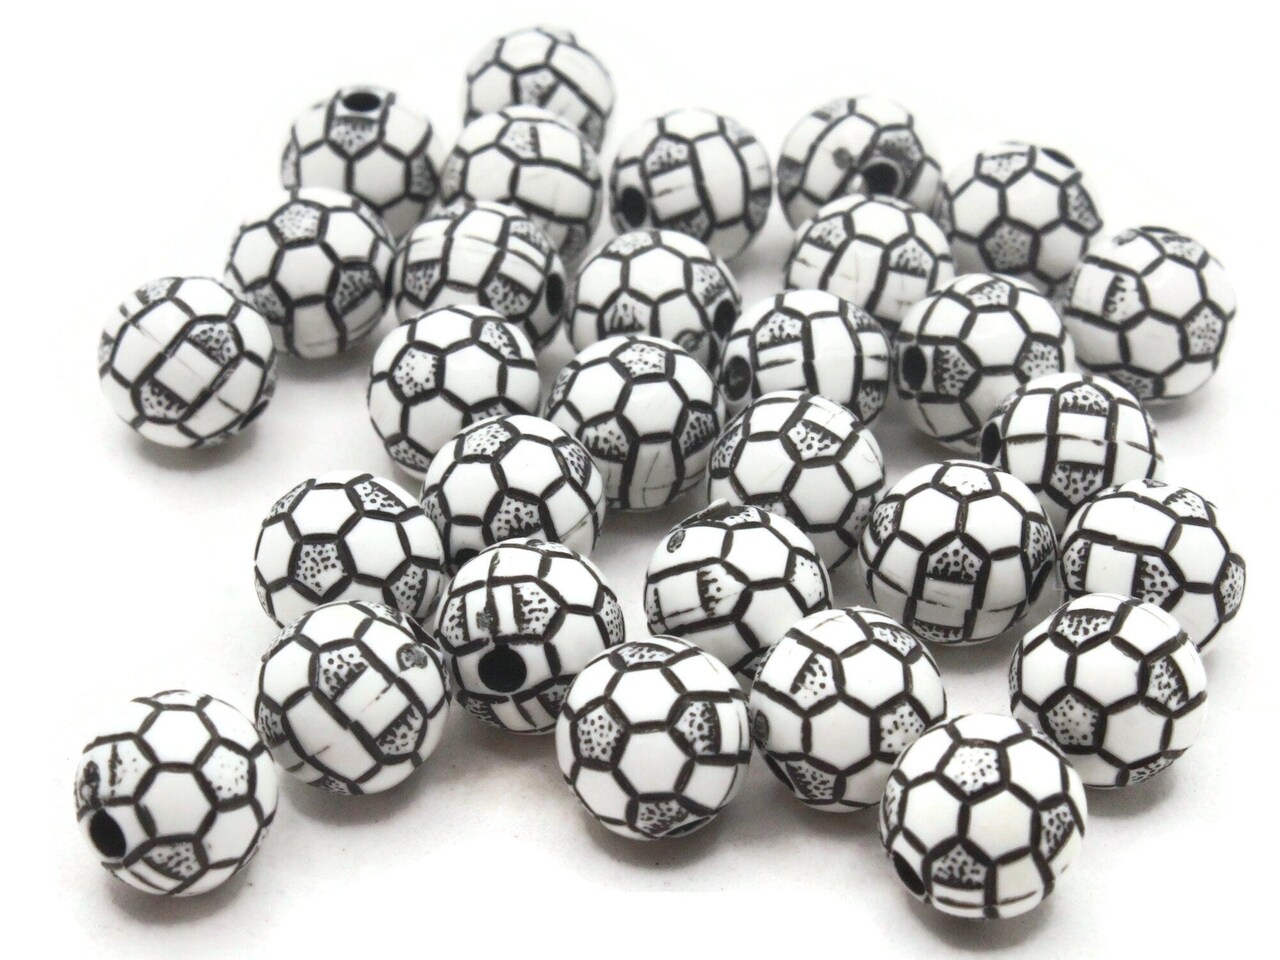 30 10mm Black and White Soccer Ball Round Plastic Sports Beads